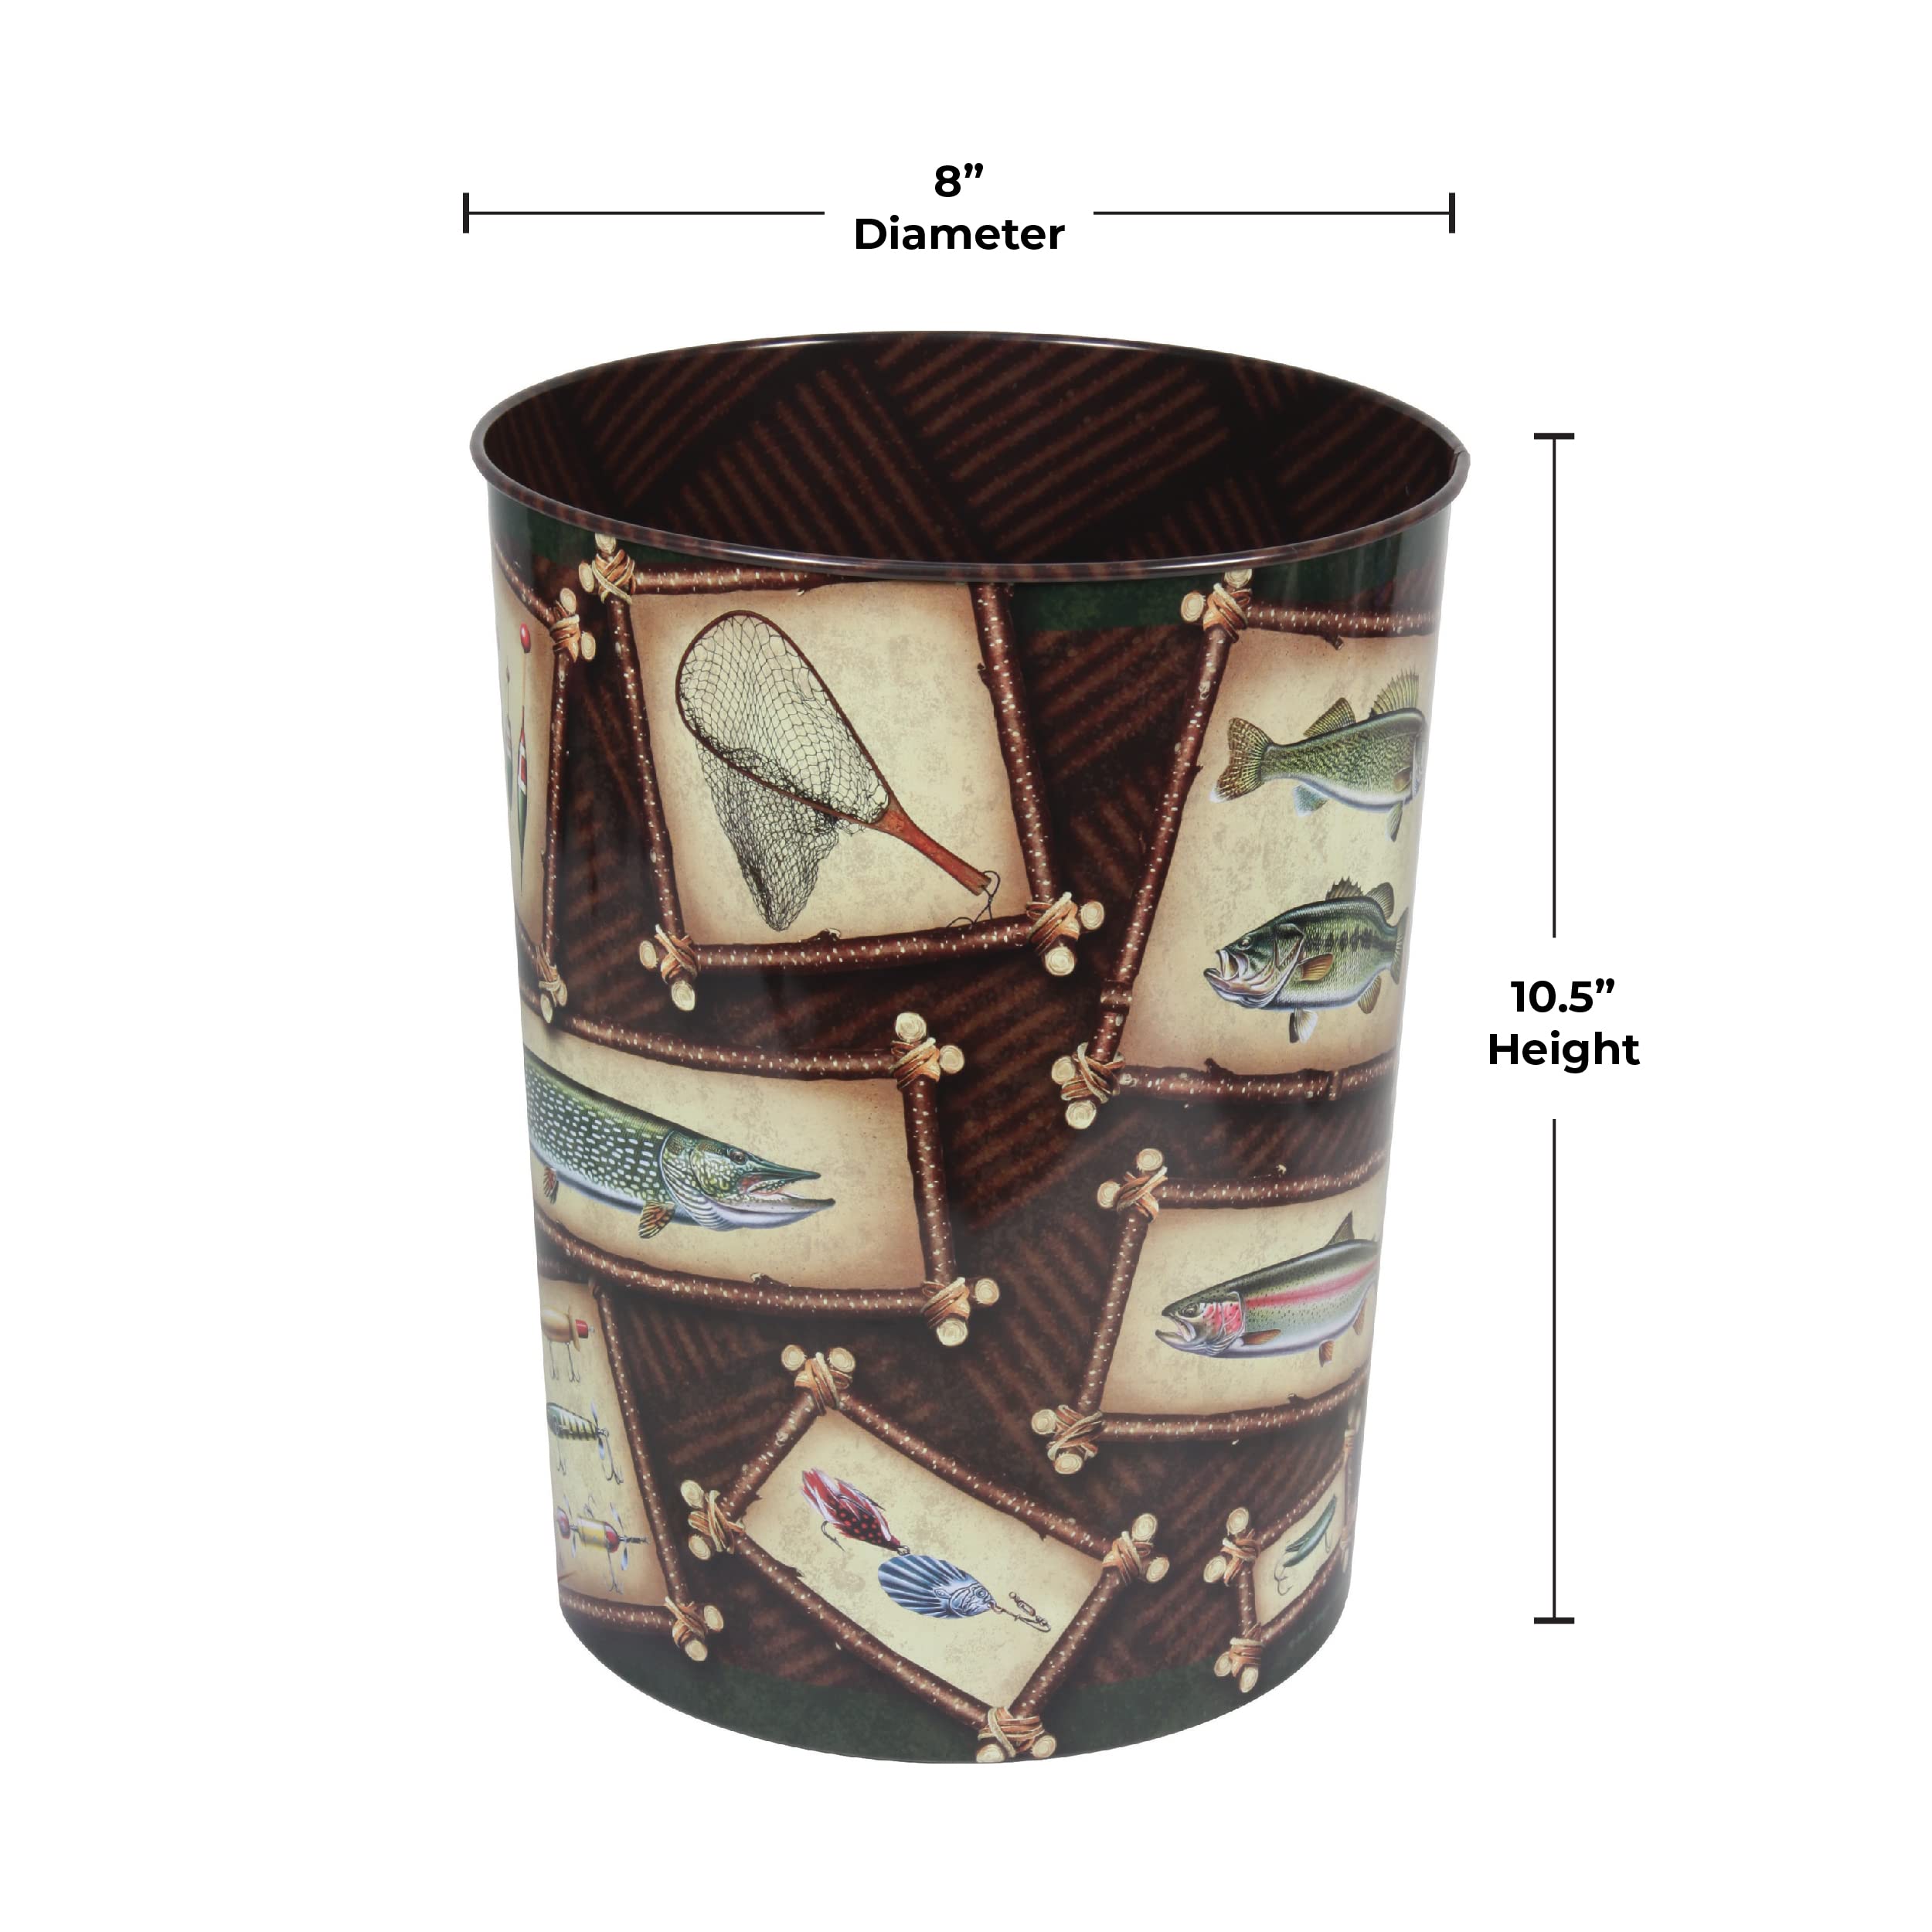 Rivers Edge Products Metal Waste Basket, 10.5-Inch Small Trash Can, Novelty Garbage Can for Office, Kitchen, Bathroom, or Bedroom, Outdoor and Coastal Home Decor, Fishing Theme